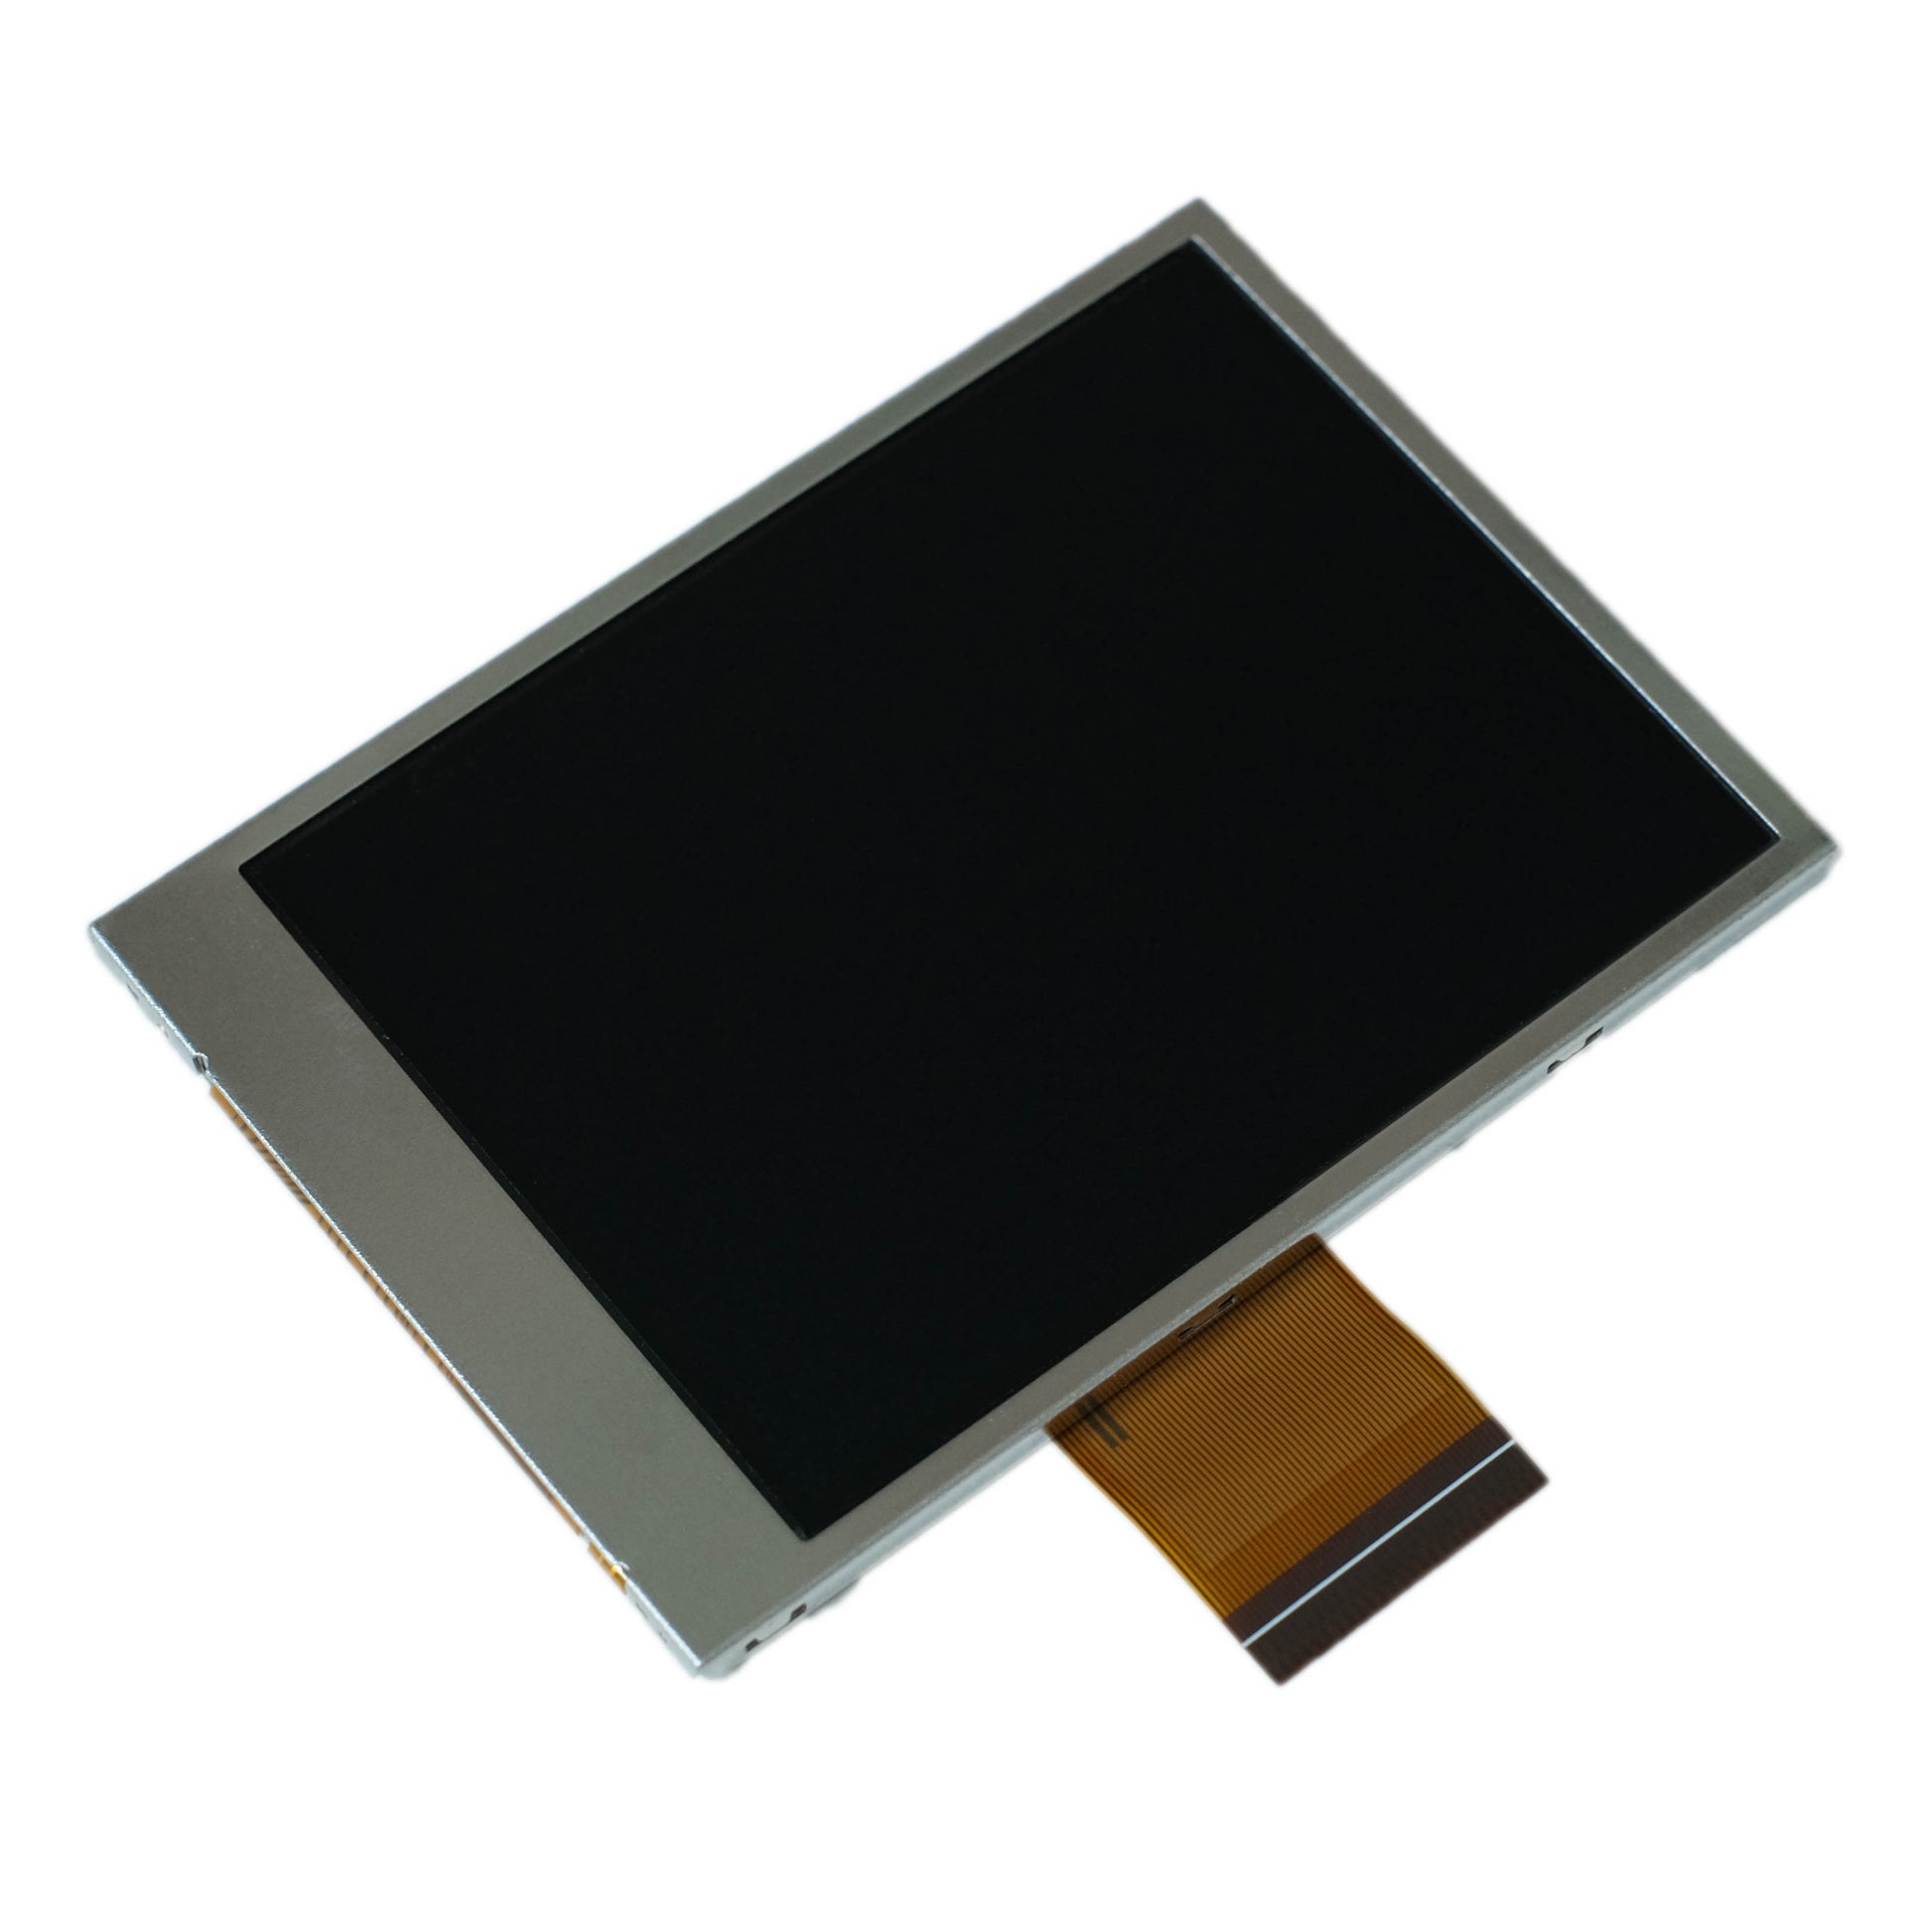 Top view of 2.6 inch Transflective TFT Display Panel